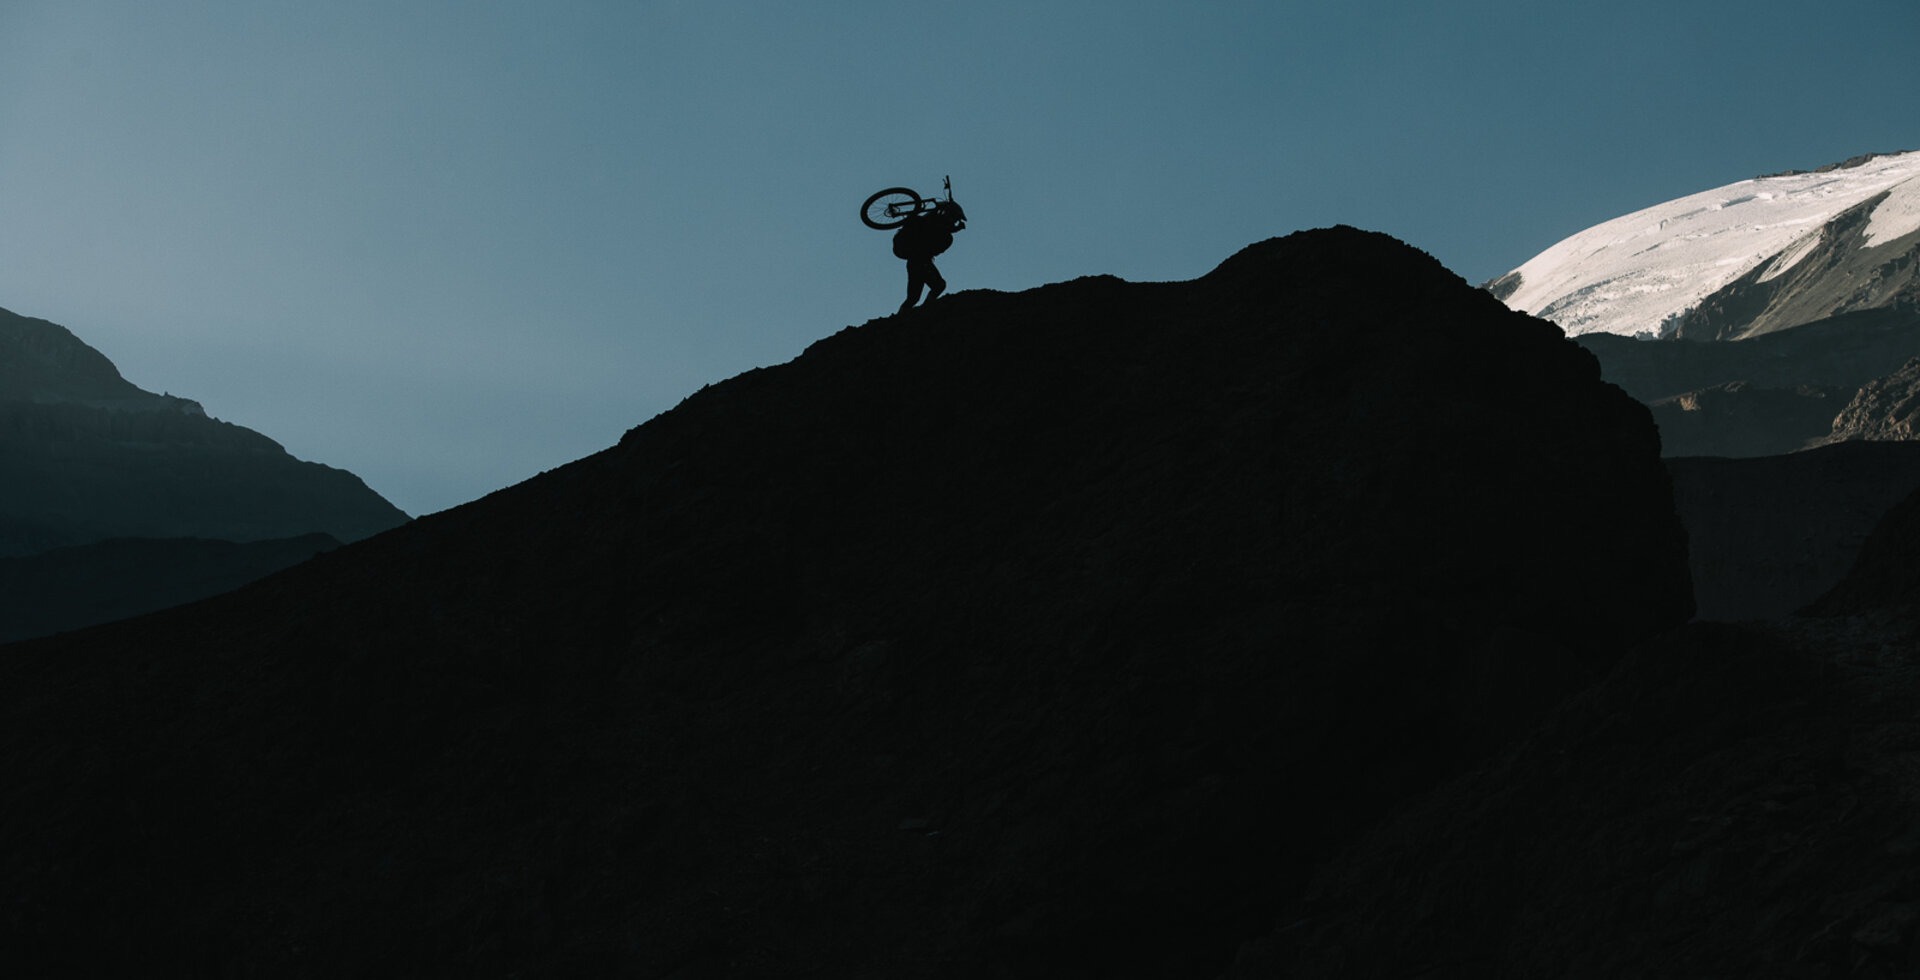 Extreme hike-a-biking—or “hoggin’,” as Kenny Smith and his inner circle of adventure-hungry buddies call it—is the entrance toll to the limitless realm of backcountry freeride.